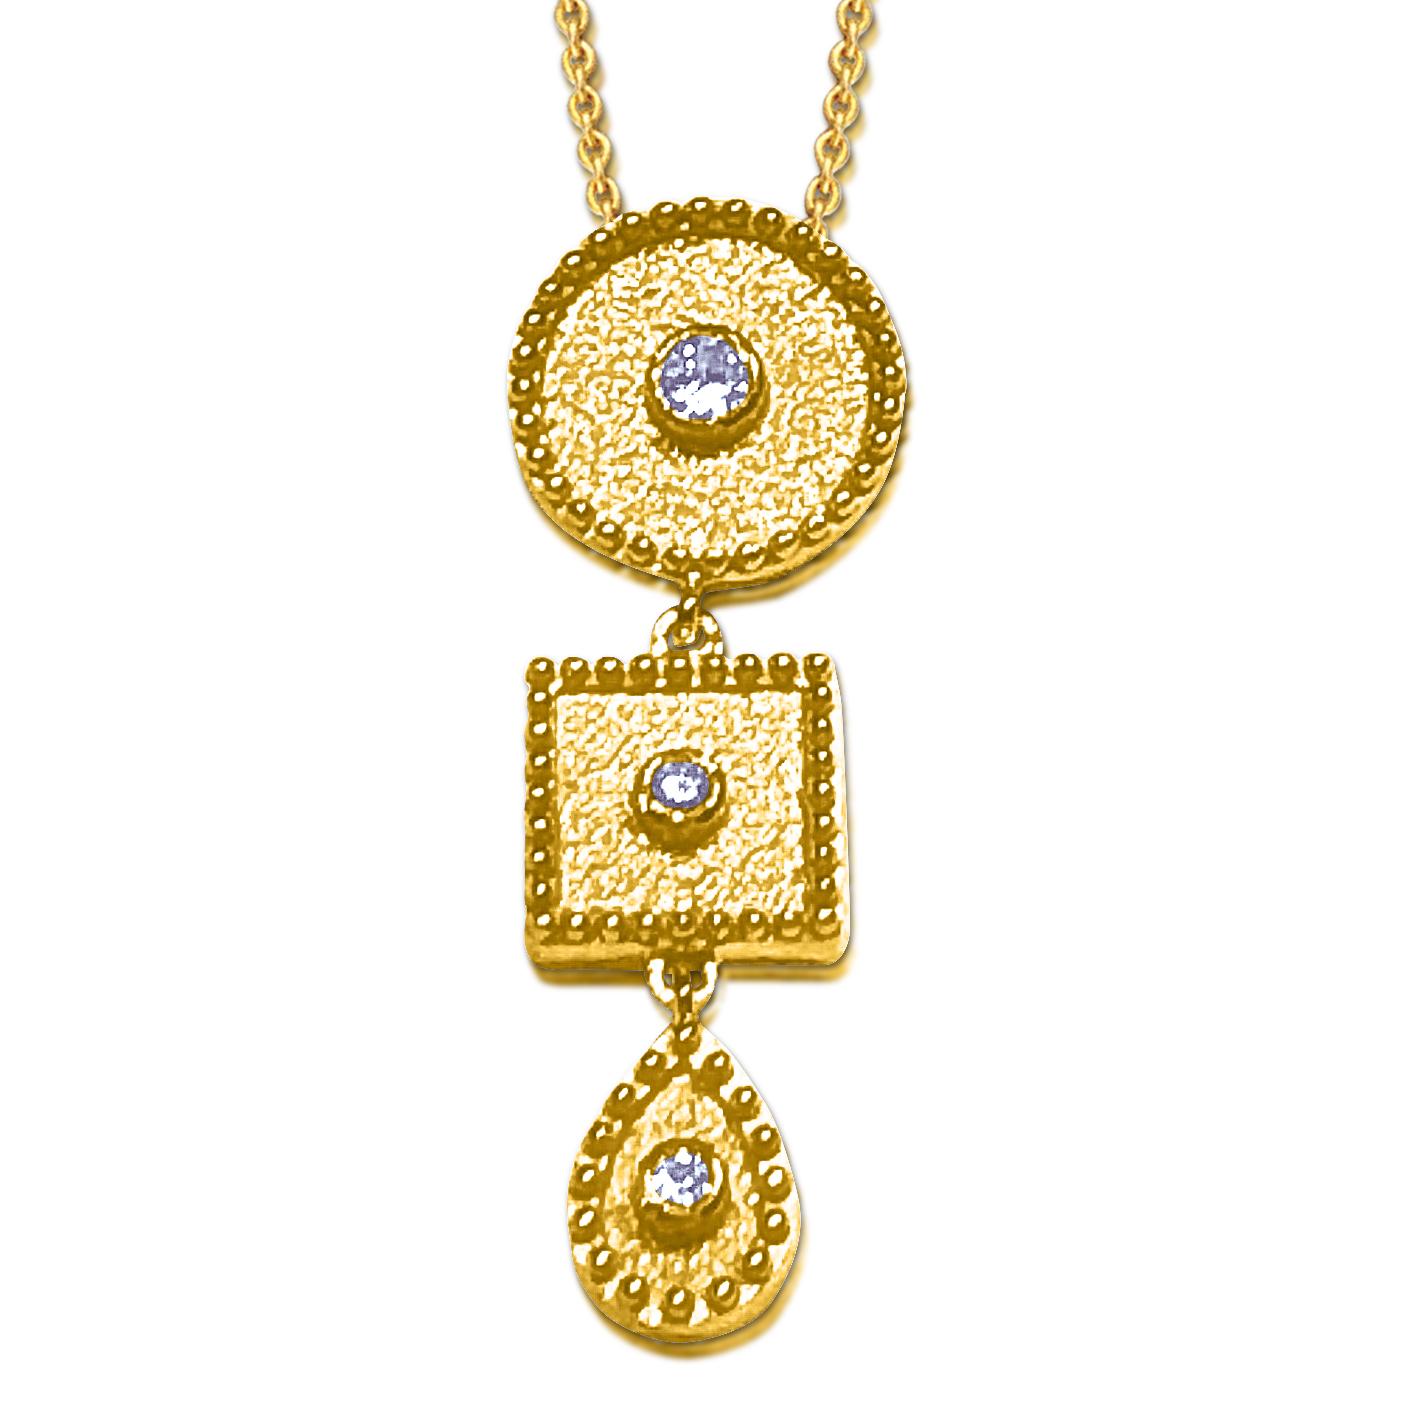 This S.Georgios pendant is all handmade from solid 18 Karat Yellow Gold and is microscopically decorated with granulation work all the way around. The background of the pendant has a unique velvet look and features 3 Brilliant cut Diamonds total